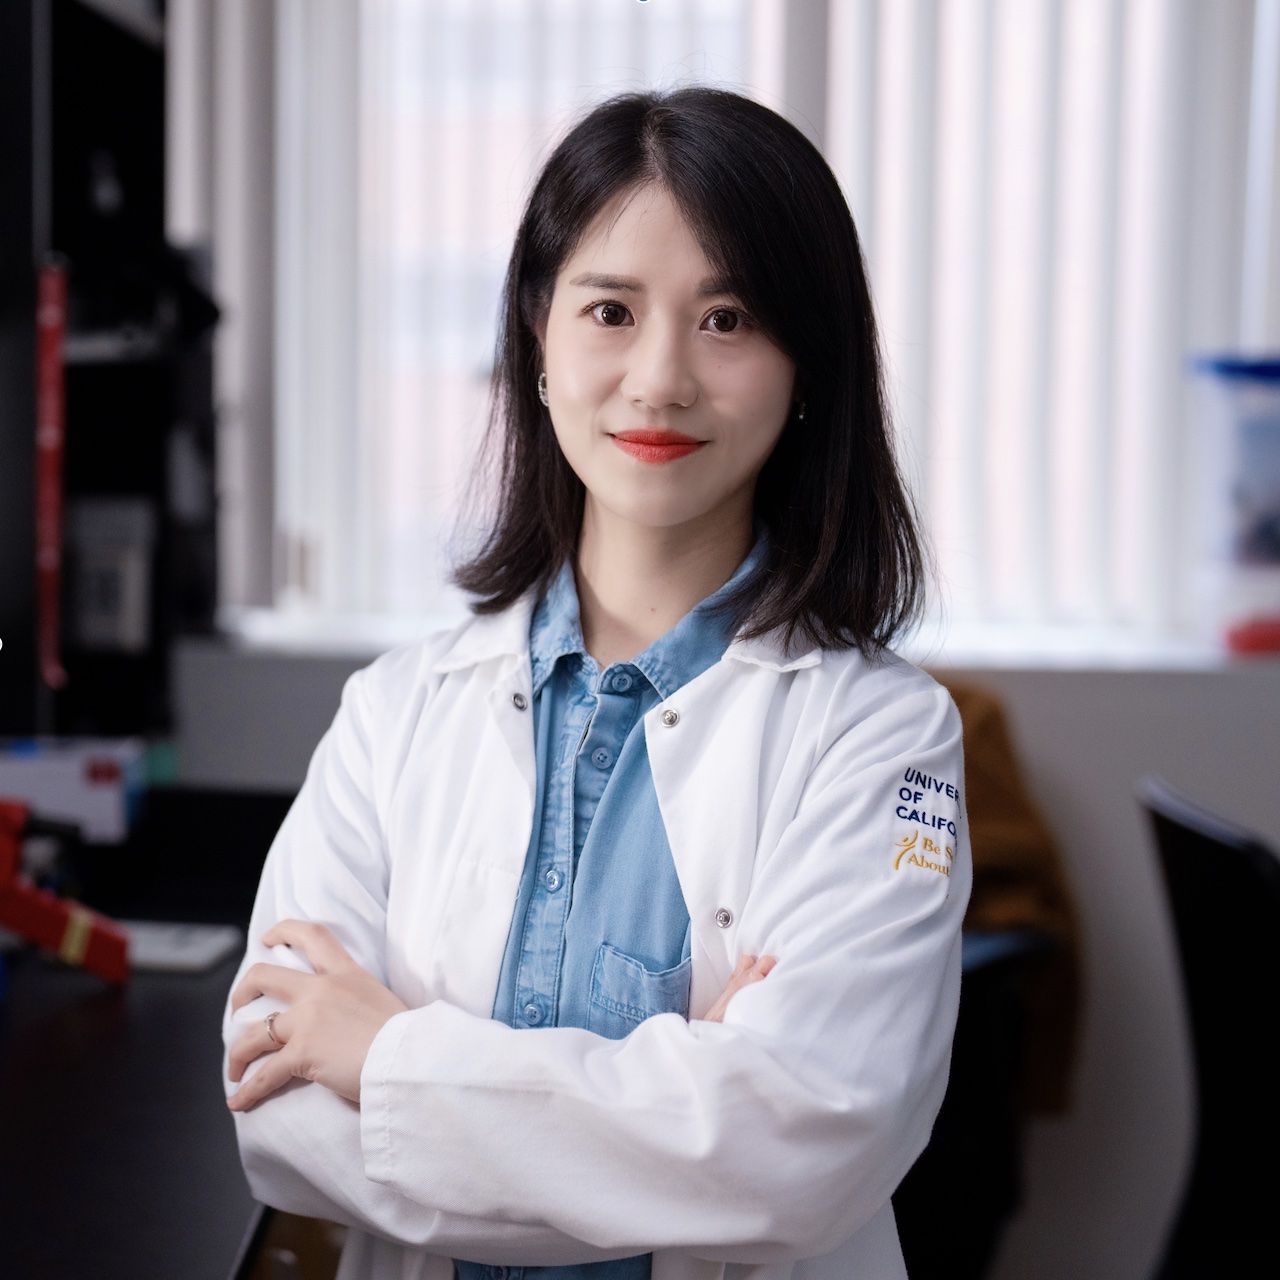 Exciting News: Dr. Shiqin (Laura) Liu is promoted to Assistant Adjunct Professor